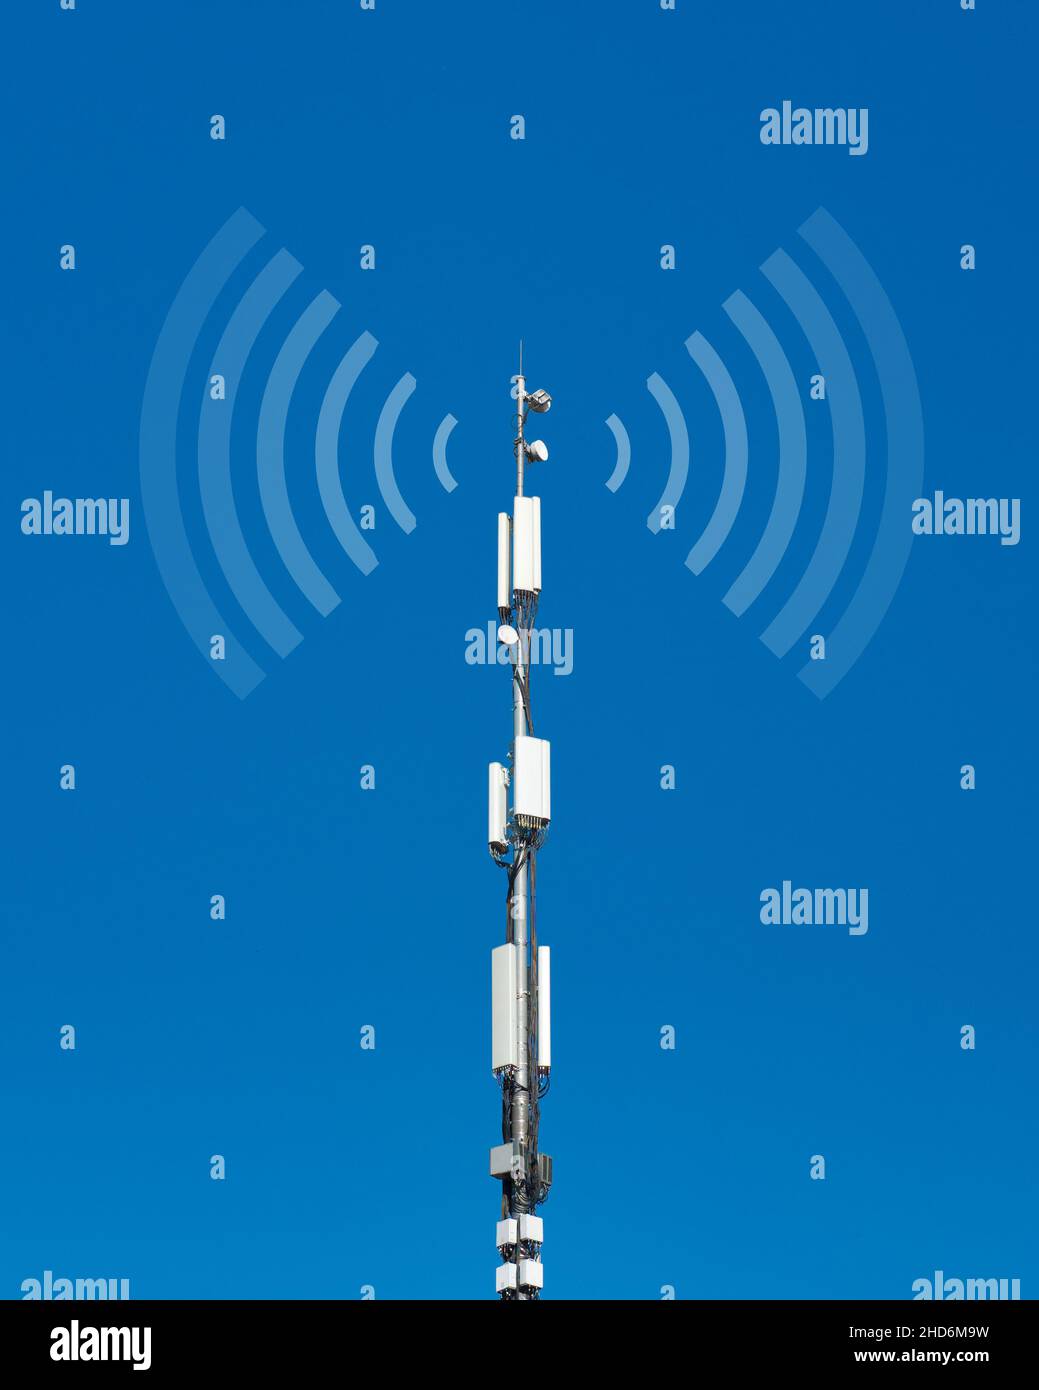 Telecommunication cell tower antenna against blue sky background. Wireless communication and modern mobile internet. Radio emission Stock Photo